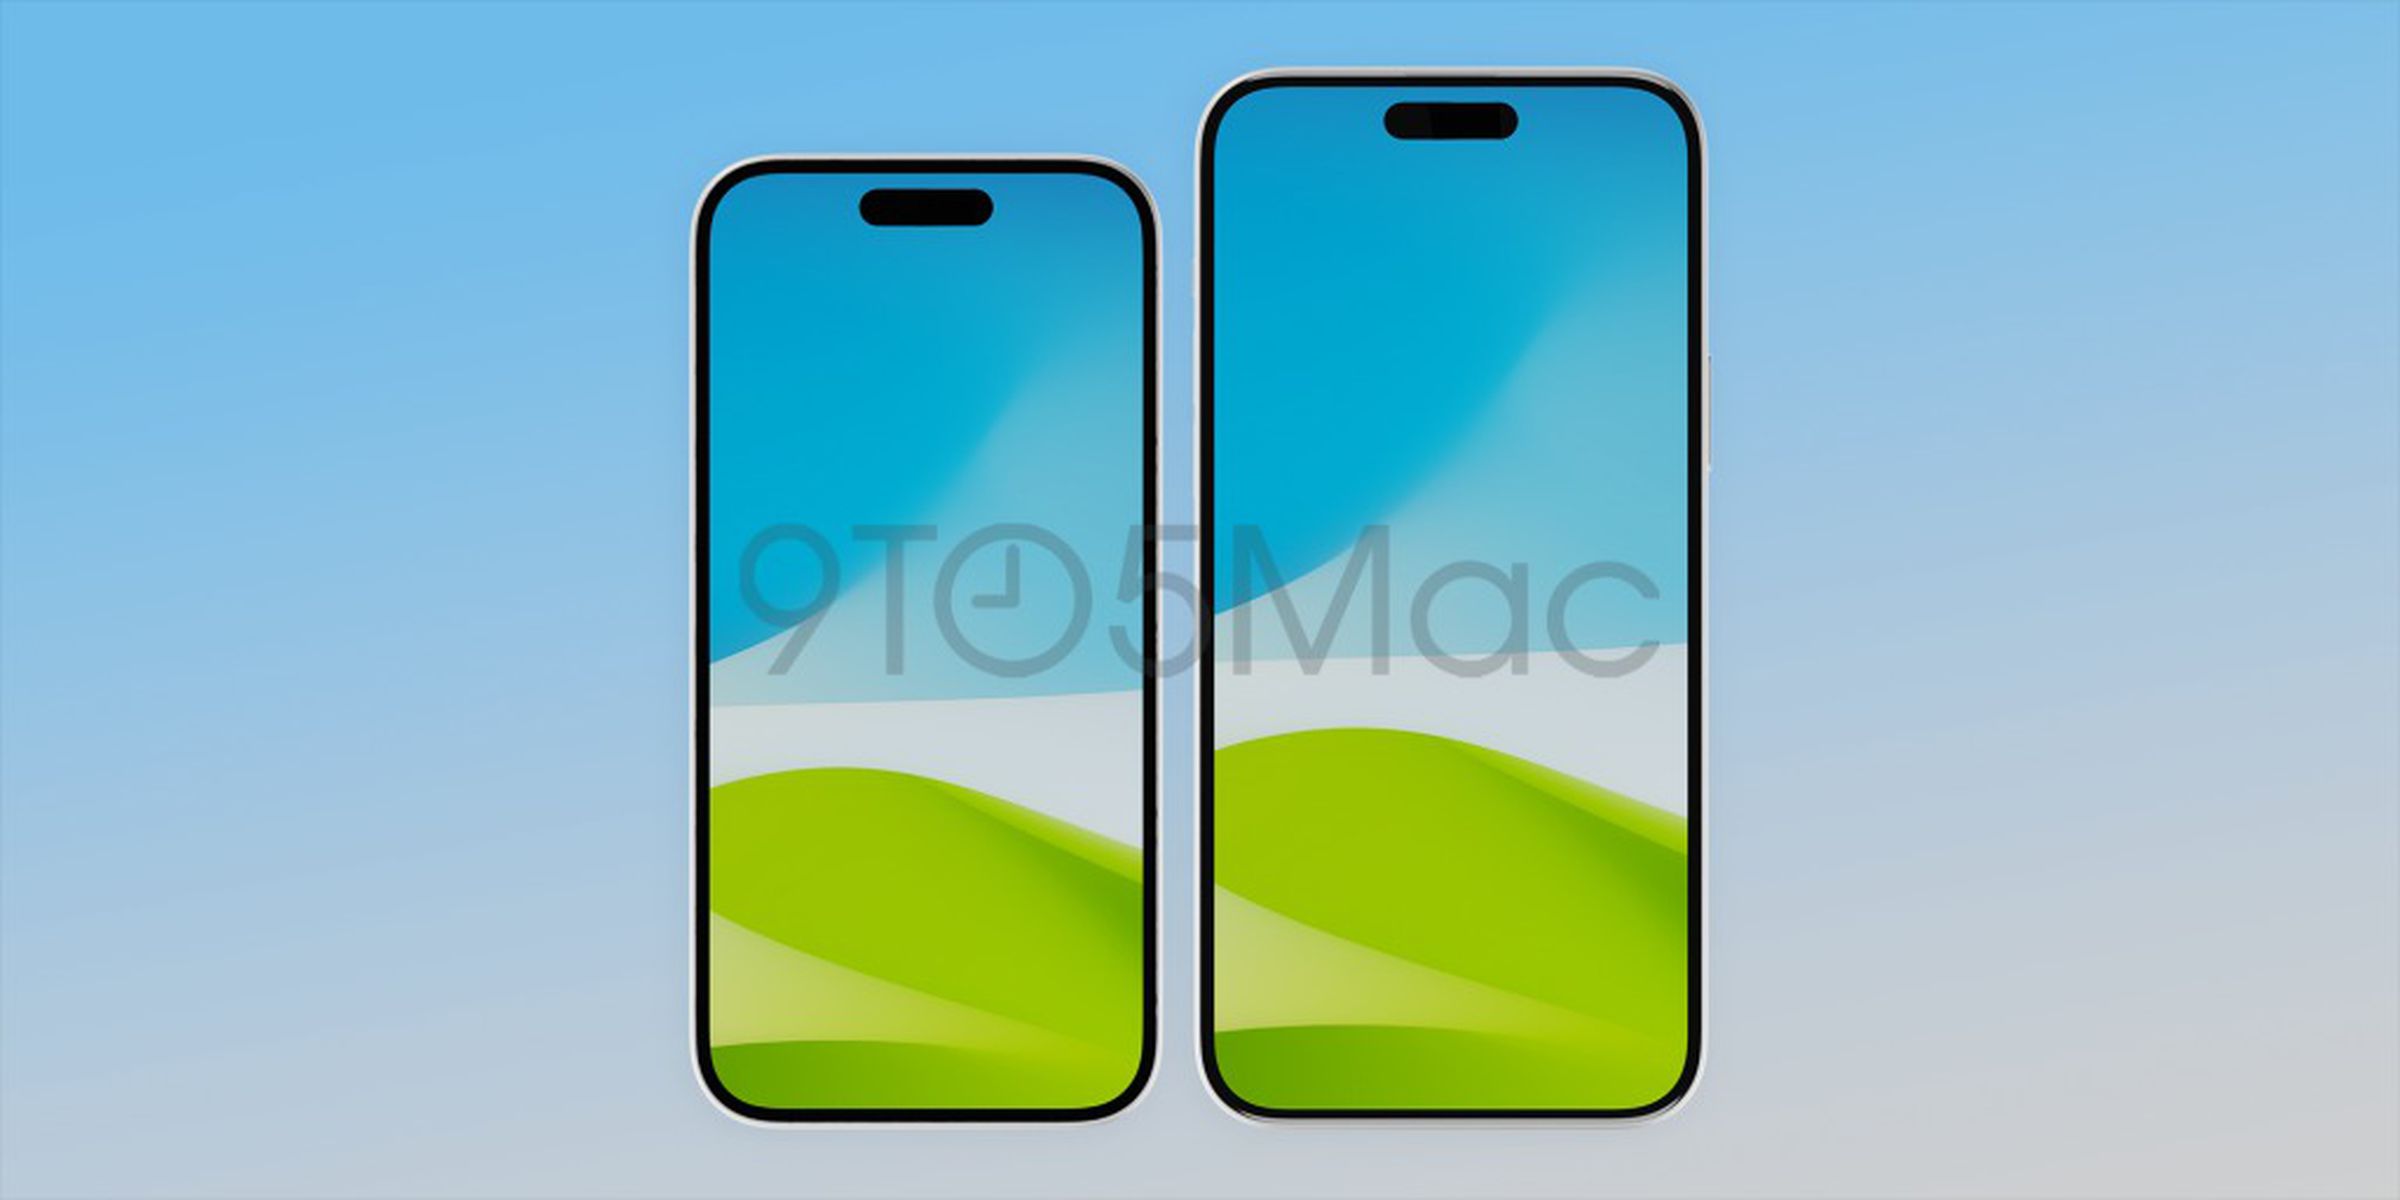 9to5Mac’s renders of the iPhone 15 and 15 Plus.